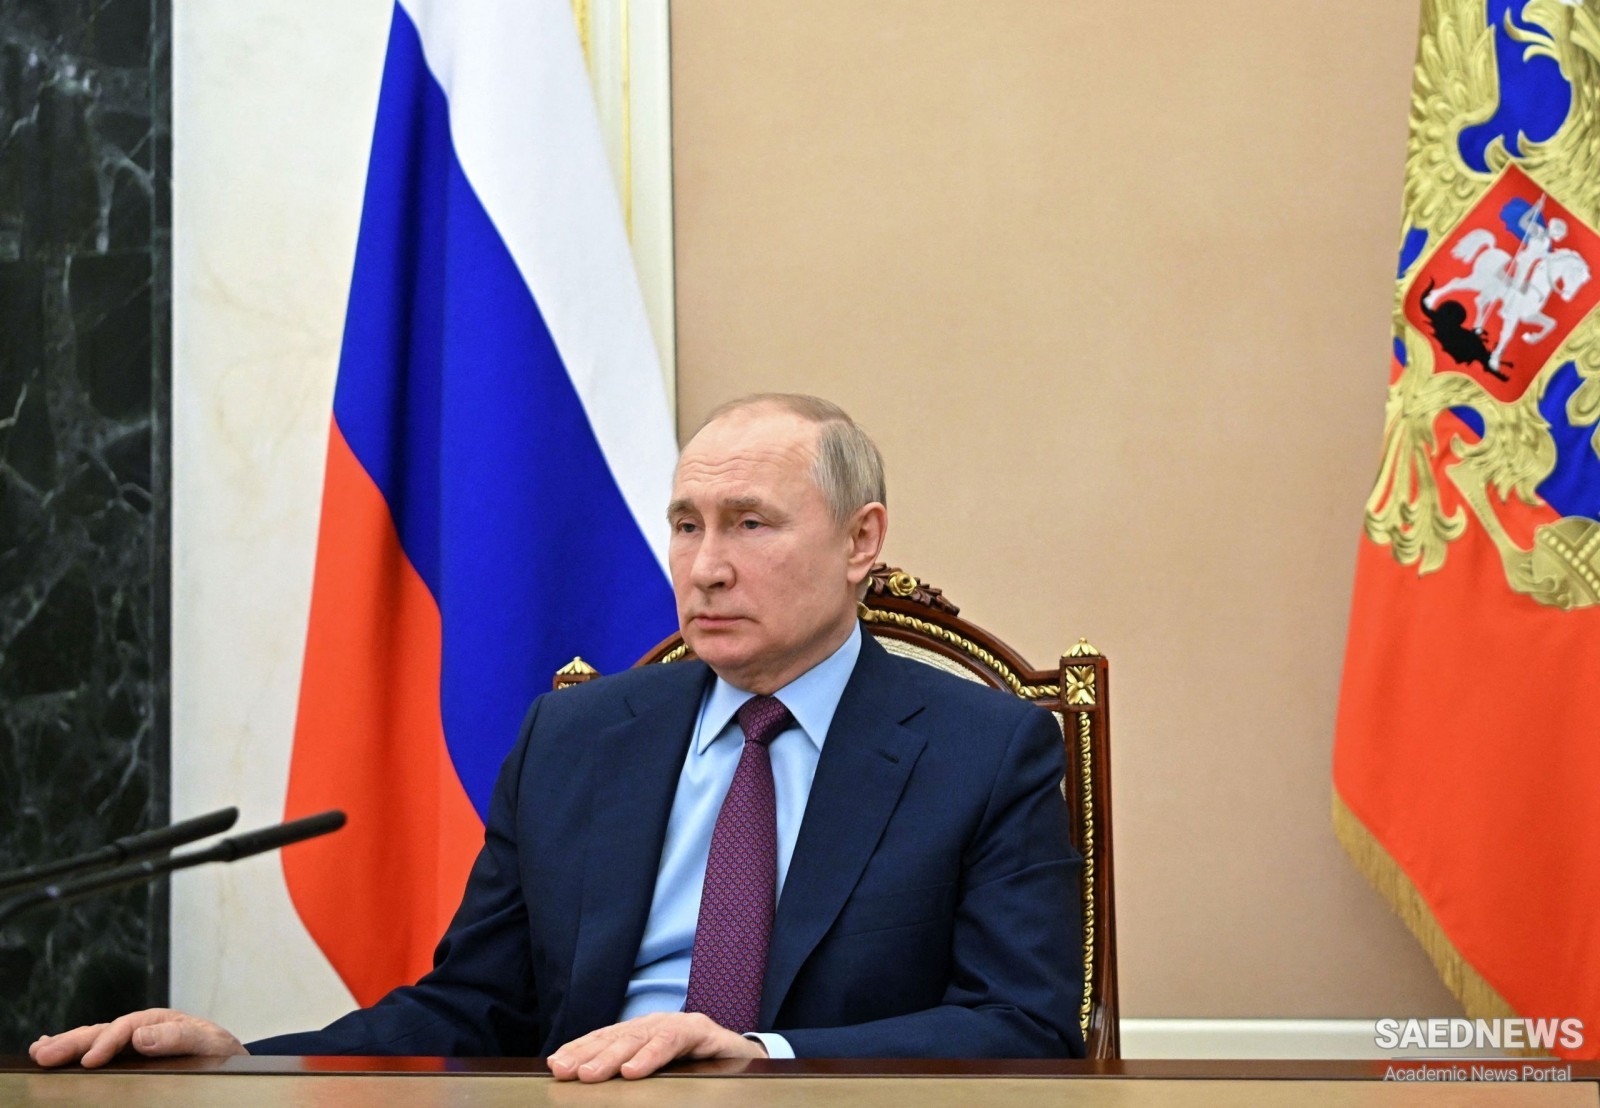 Putin signs ‘immediate’ recognition of Donbass regions